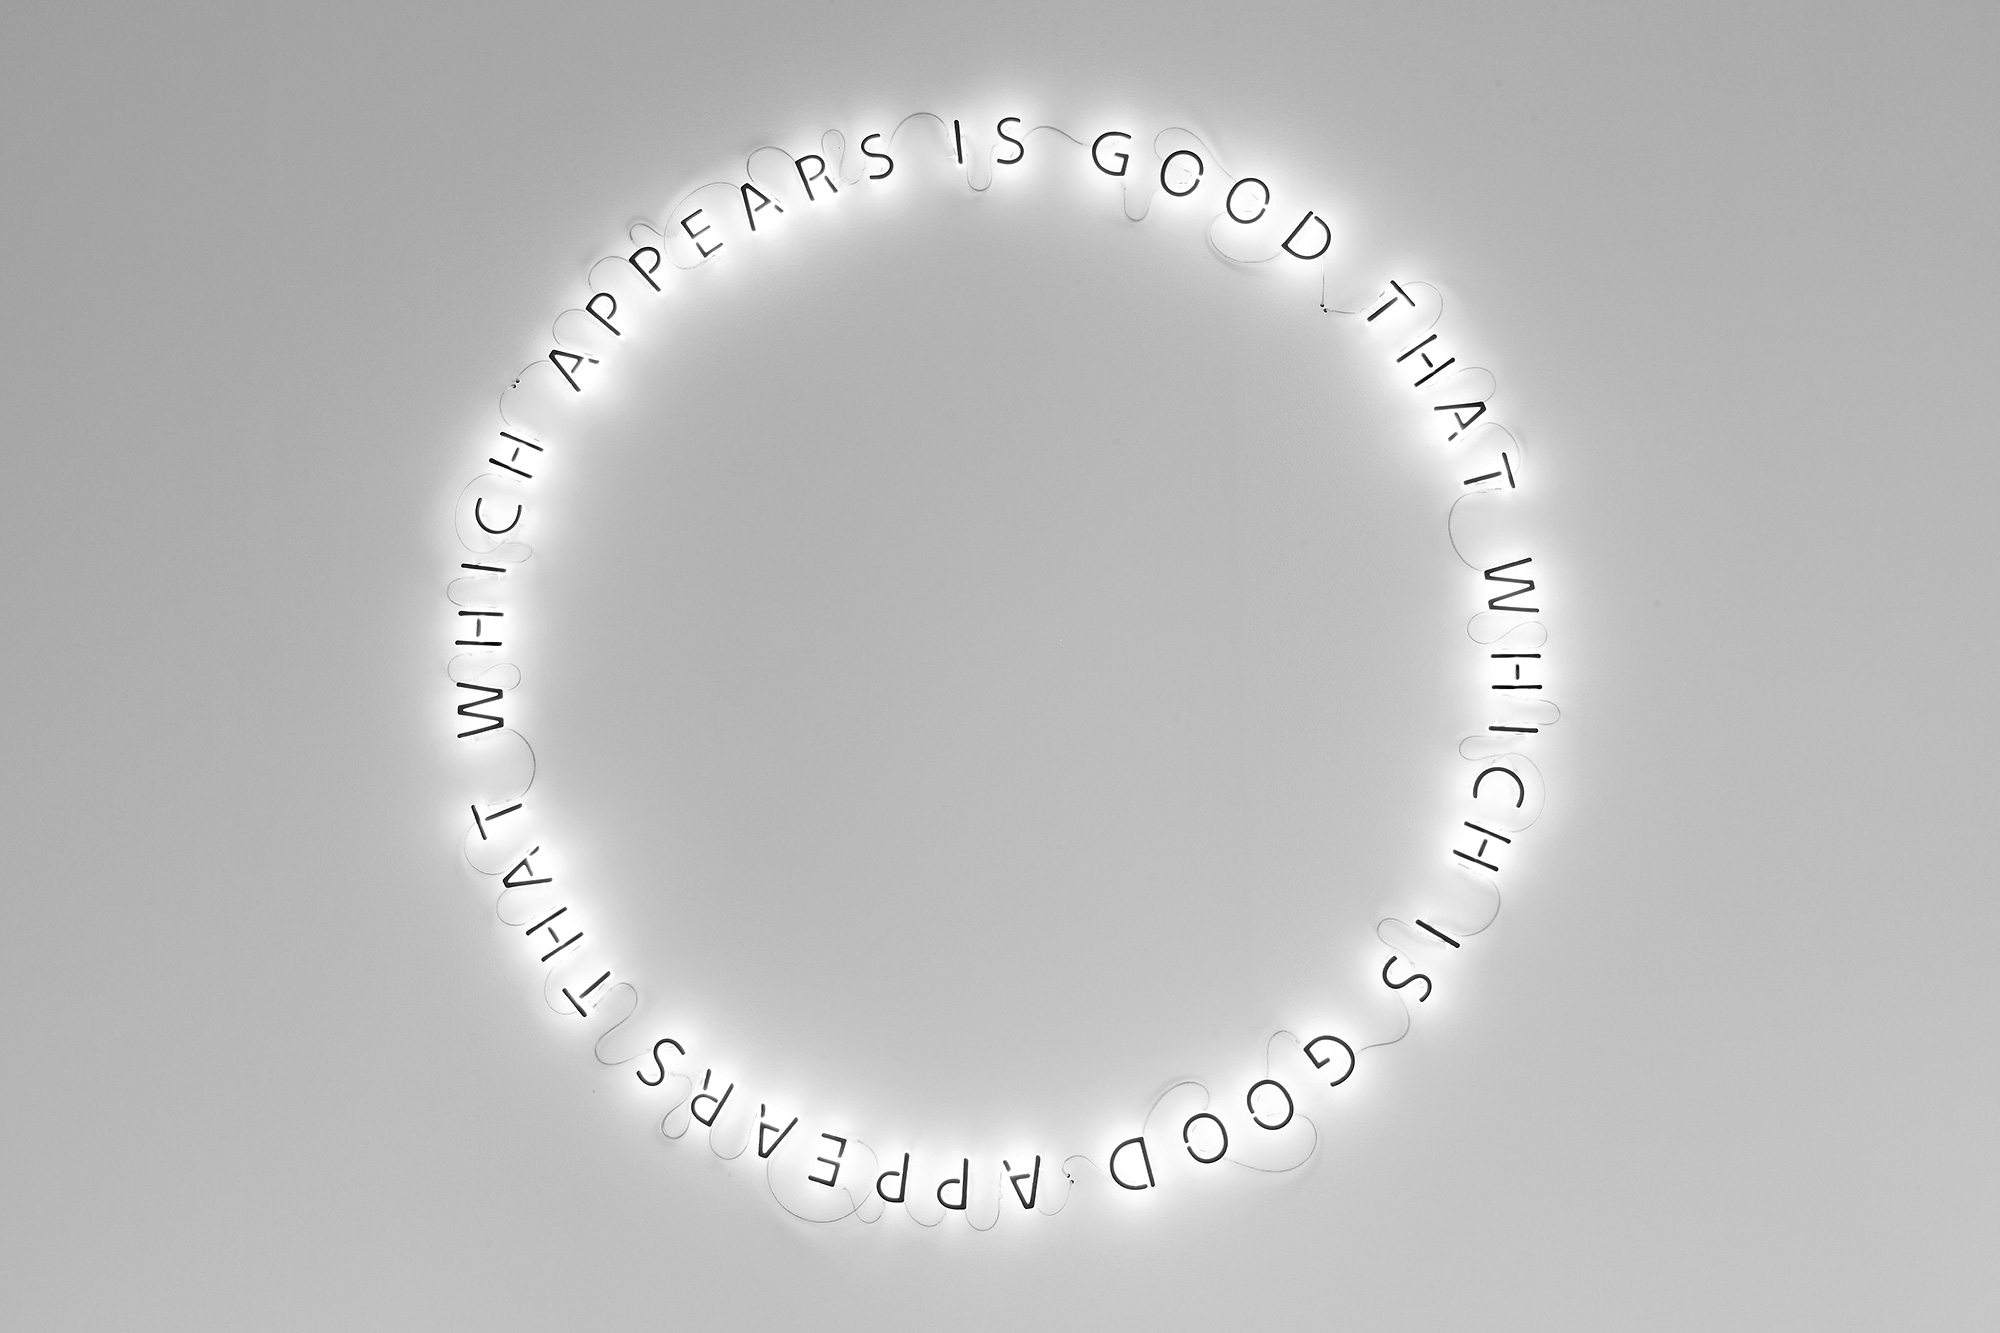 FAMED, Untitled [That Which Appears Is Good That Which Is Good Appears]